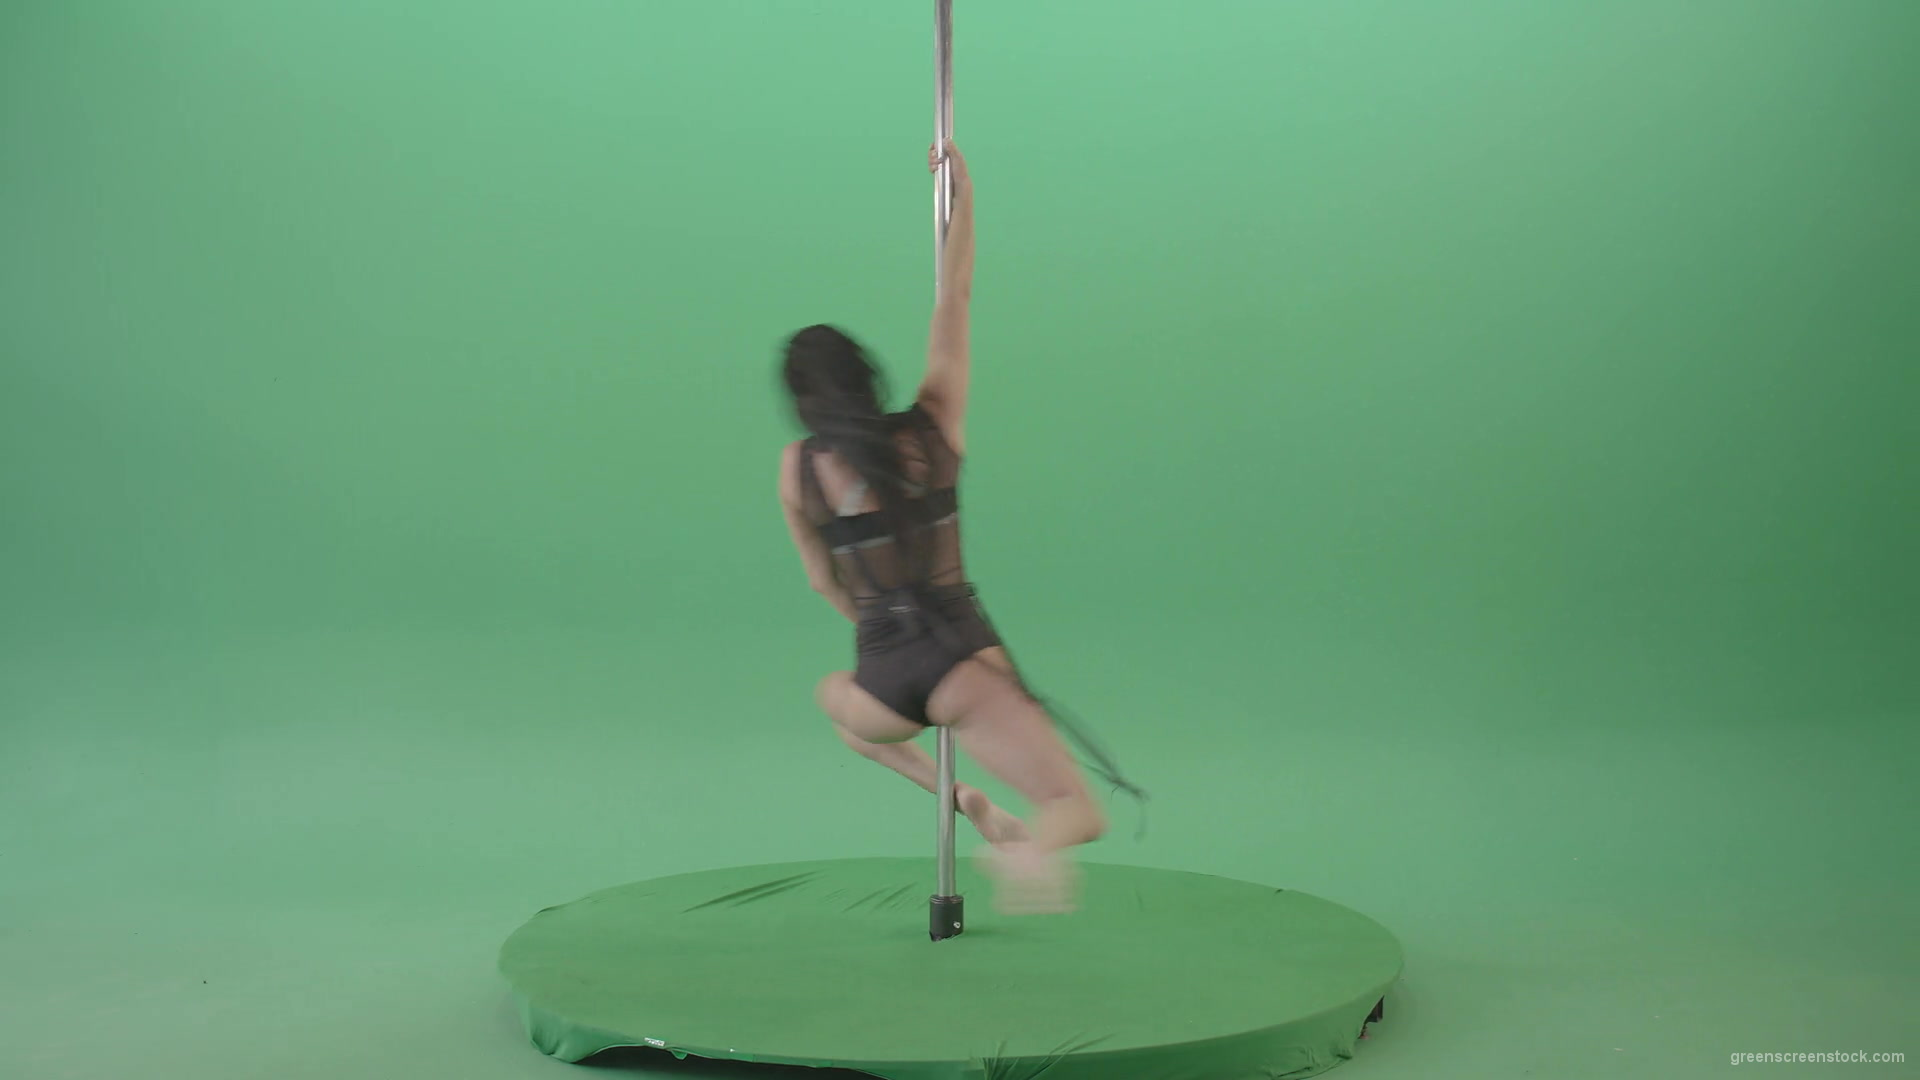 Sexy-girl-in-Lingerie-wear-dancing-strip-pole-dance-isolated-on-green-screen-4K-Video-Footage-1920_008 Green Screen Stock